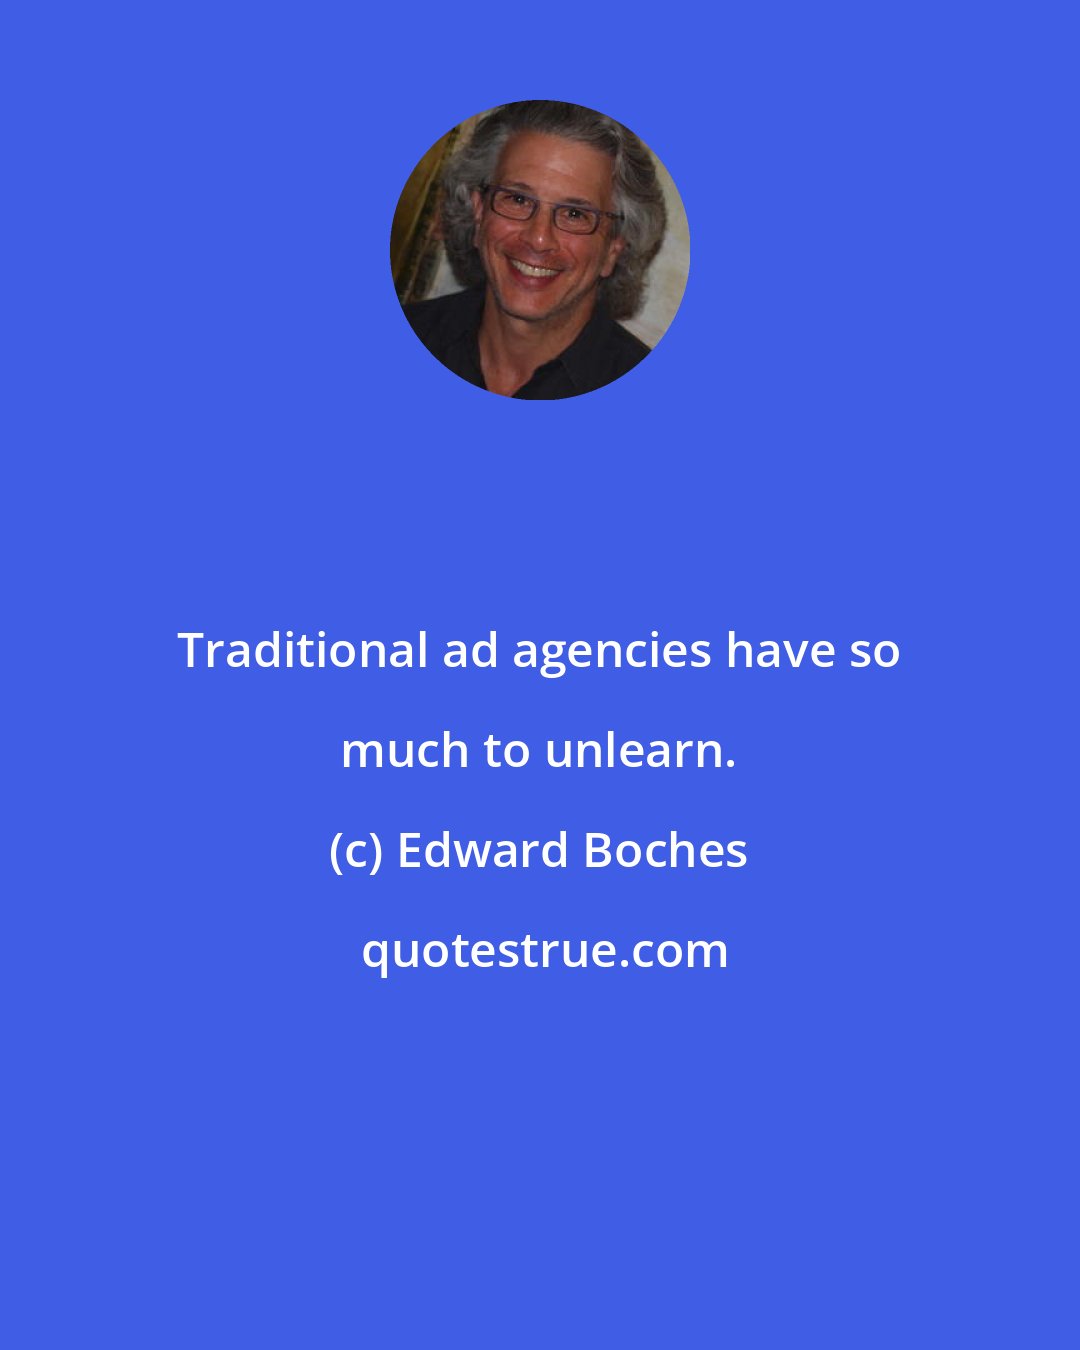 Edward Boches: Traditional ad agencies have so much to unlearn.